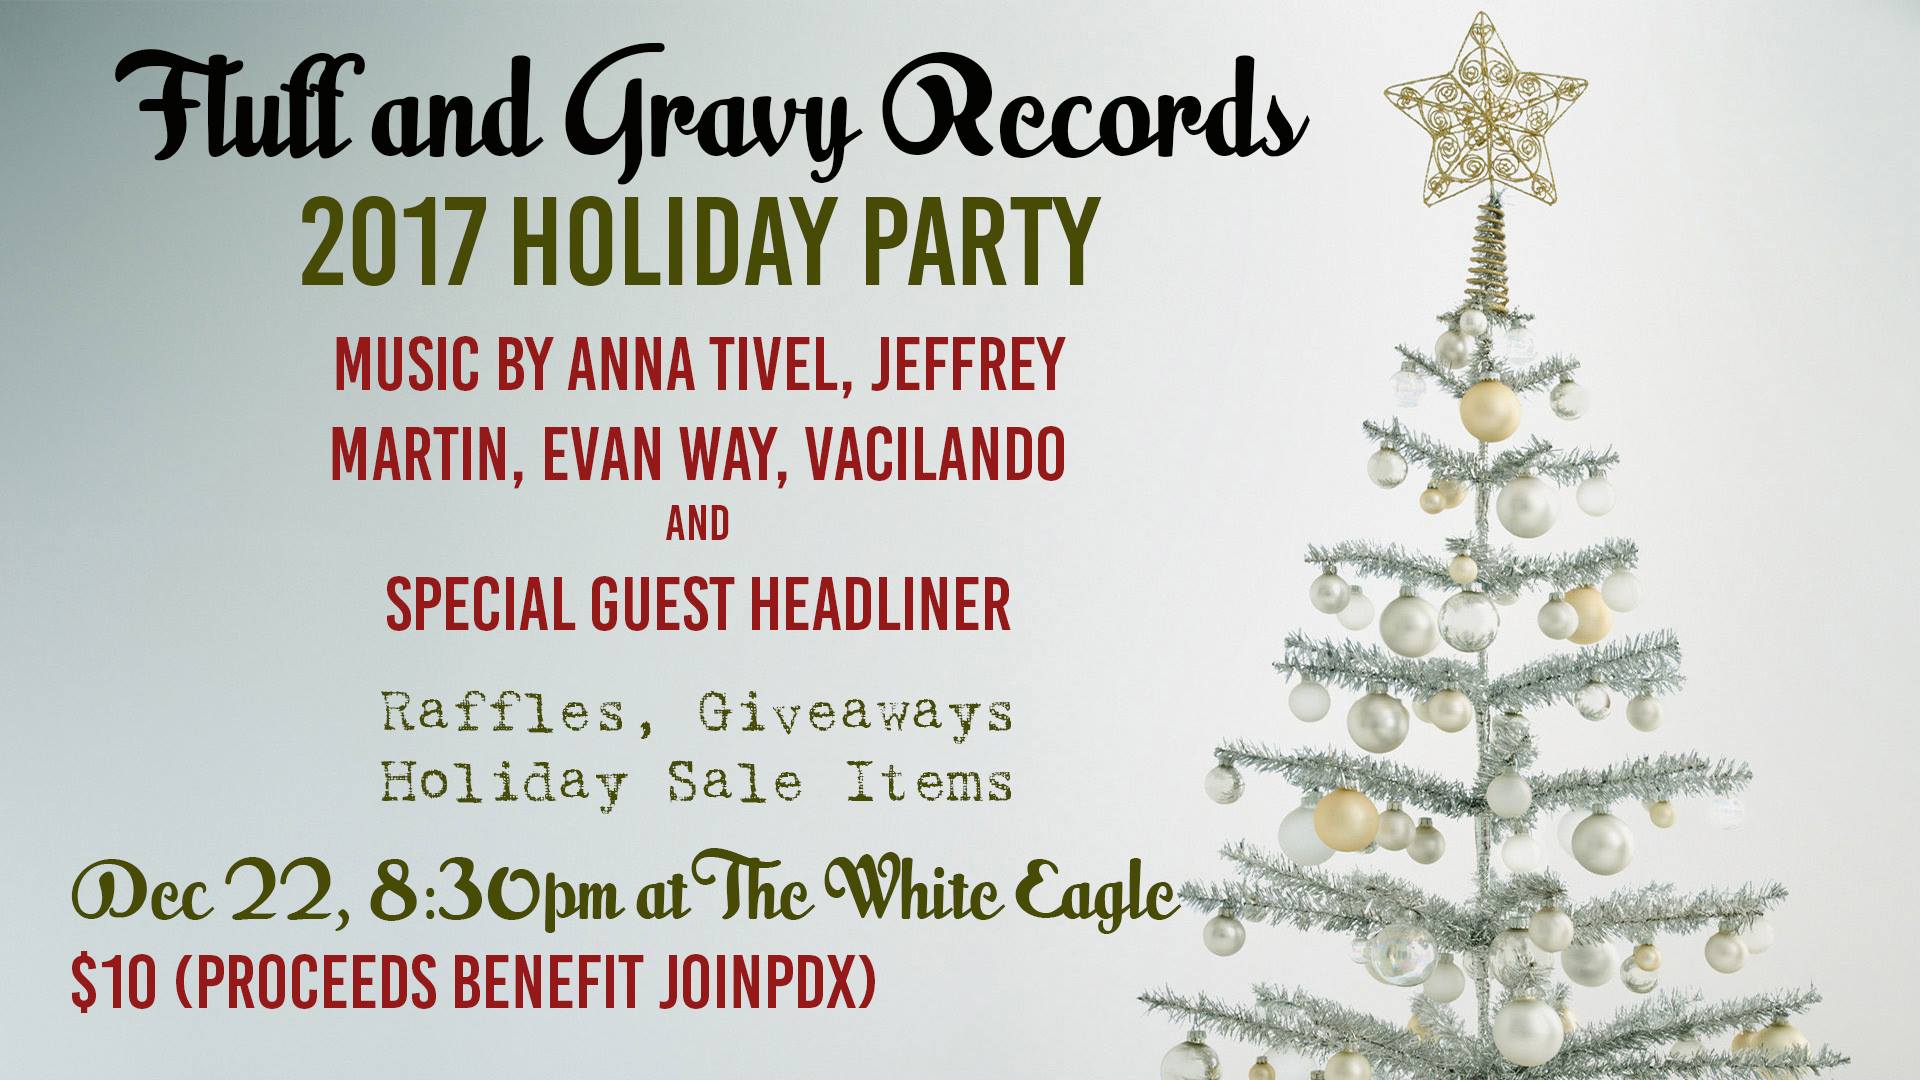 Fluff and Gravy Records Holiday Party